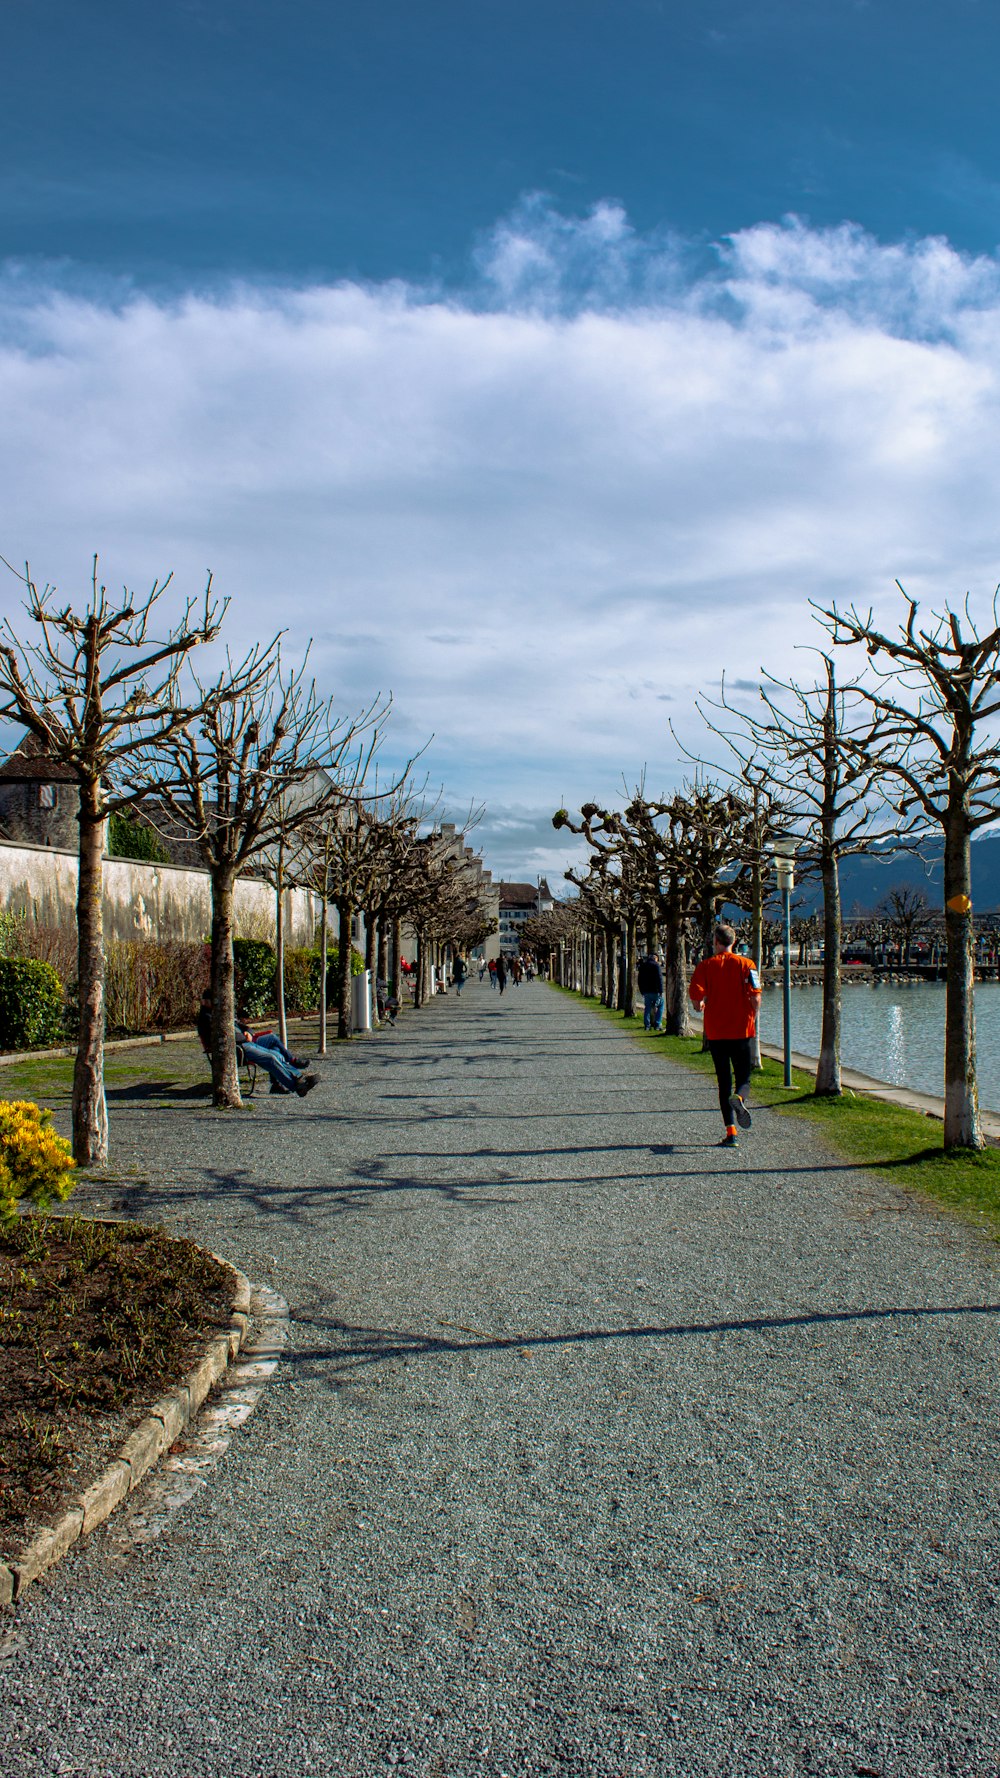 a person walking down a paved path next to a body of water